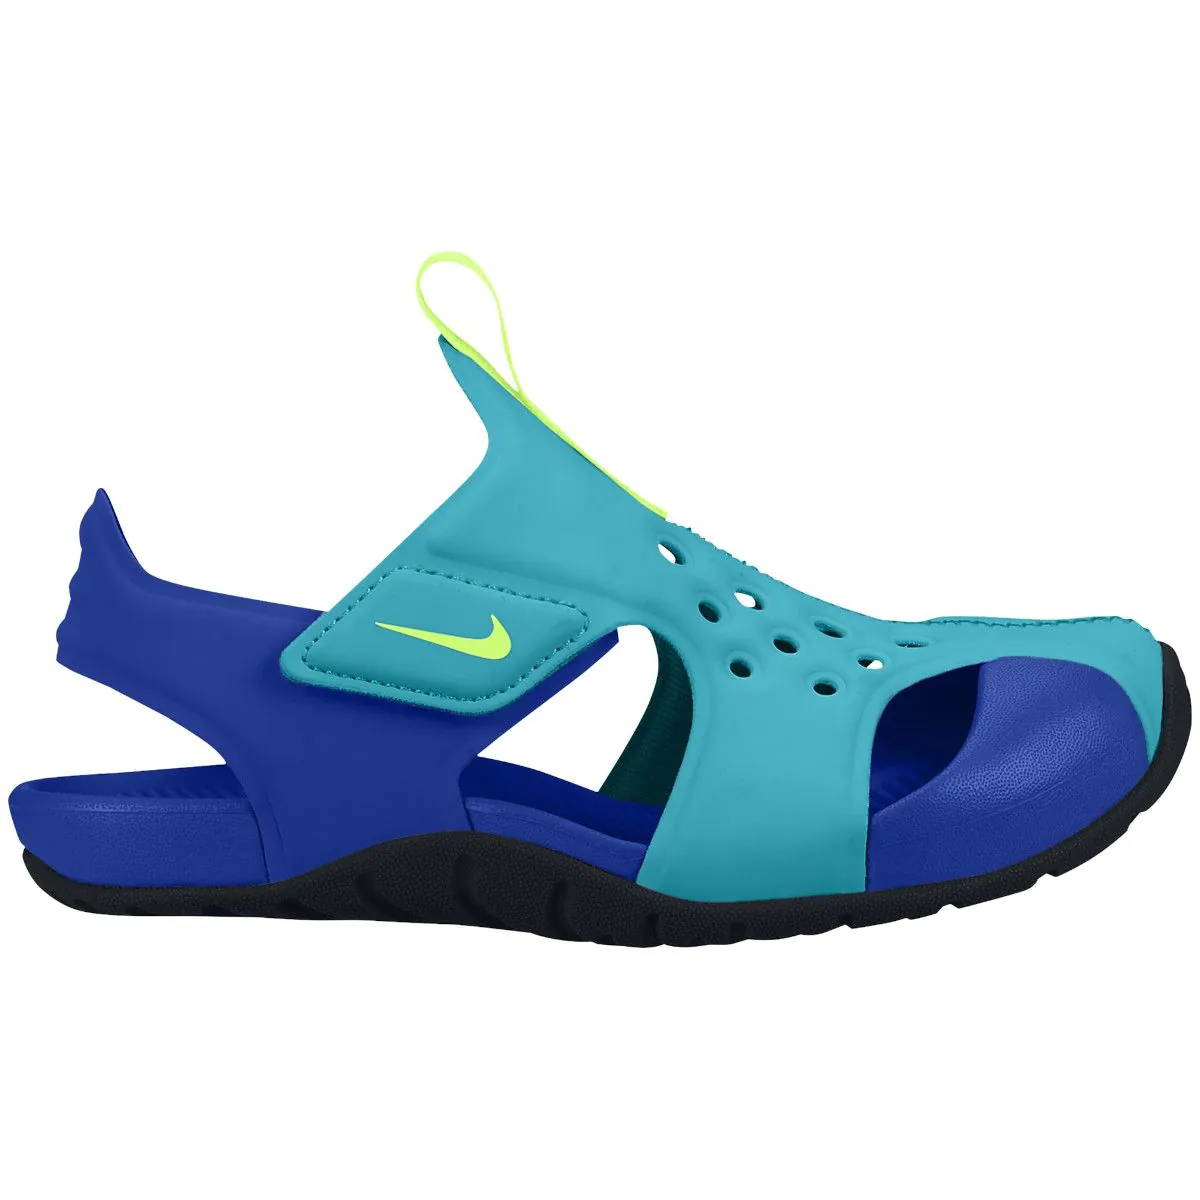 Nike Sunray Protect 2 Junior Sandals (PS) 943826-303